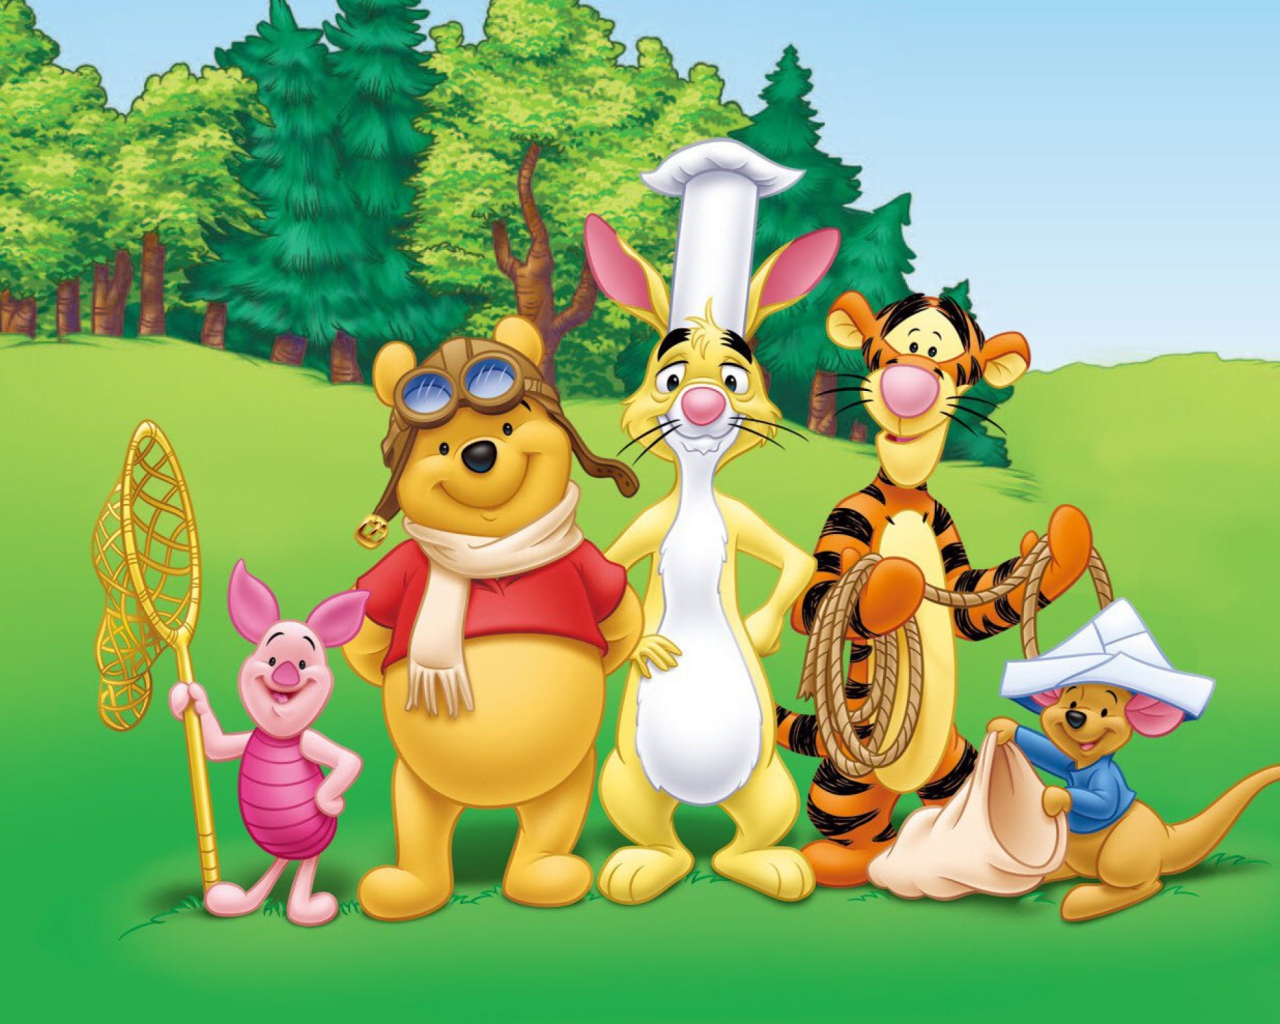 Das Pooh and Friends Wallpaper 1280x1024